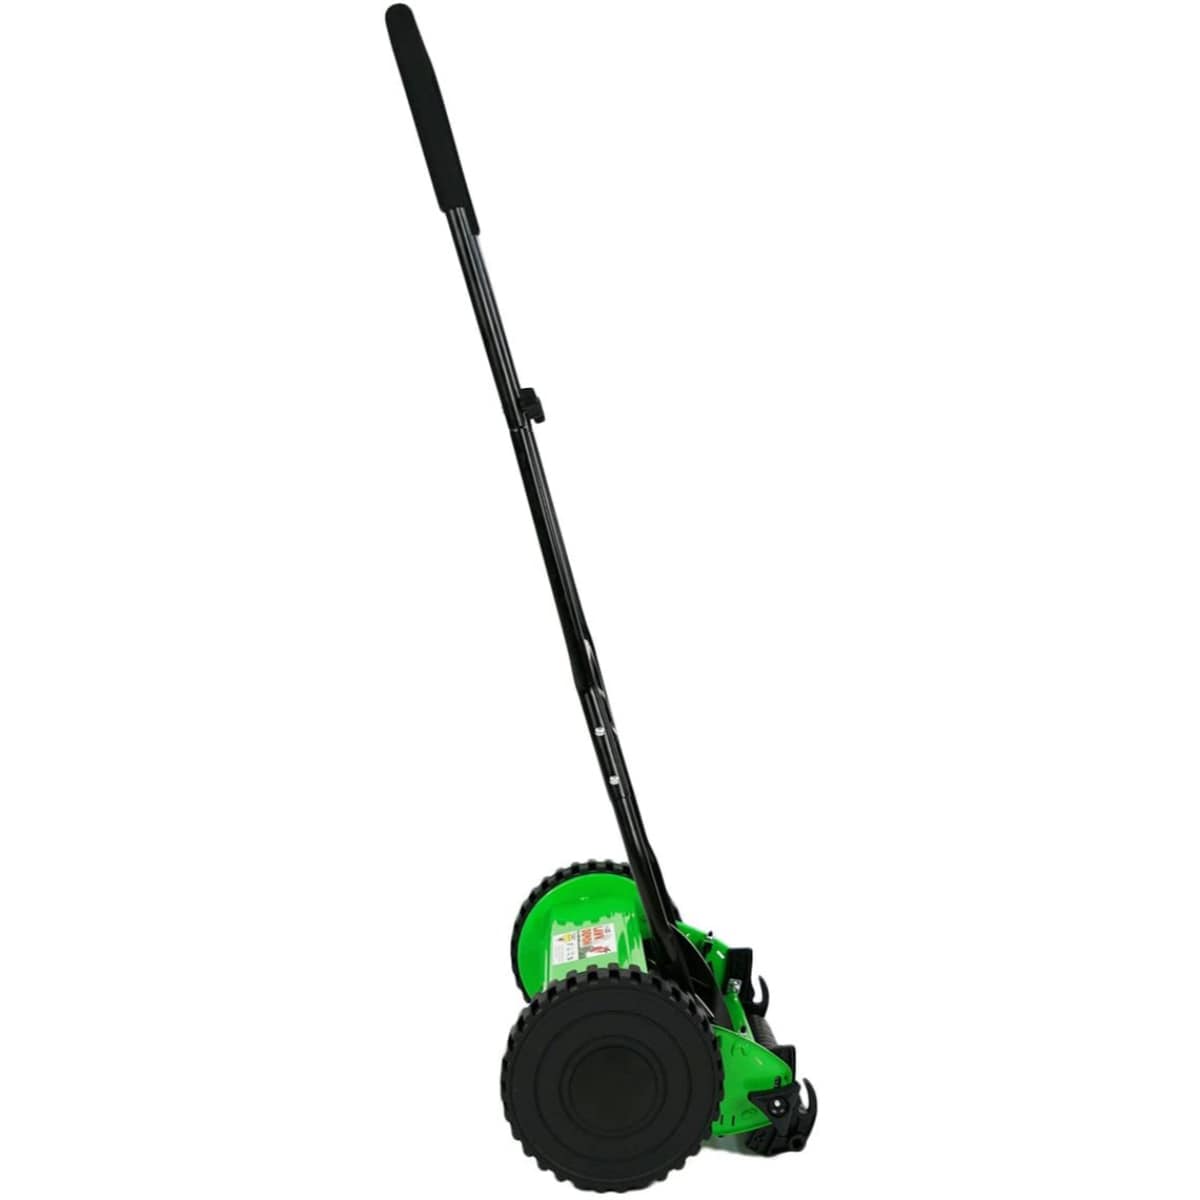 DuroStar 10-Inch Reel Lawn Mower with Bagger, 5-Blade, Aluminum